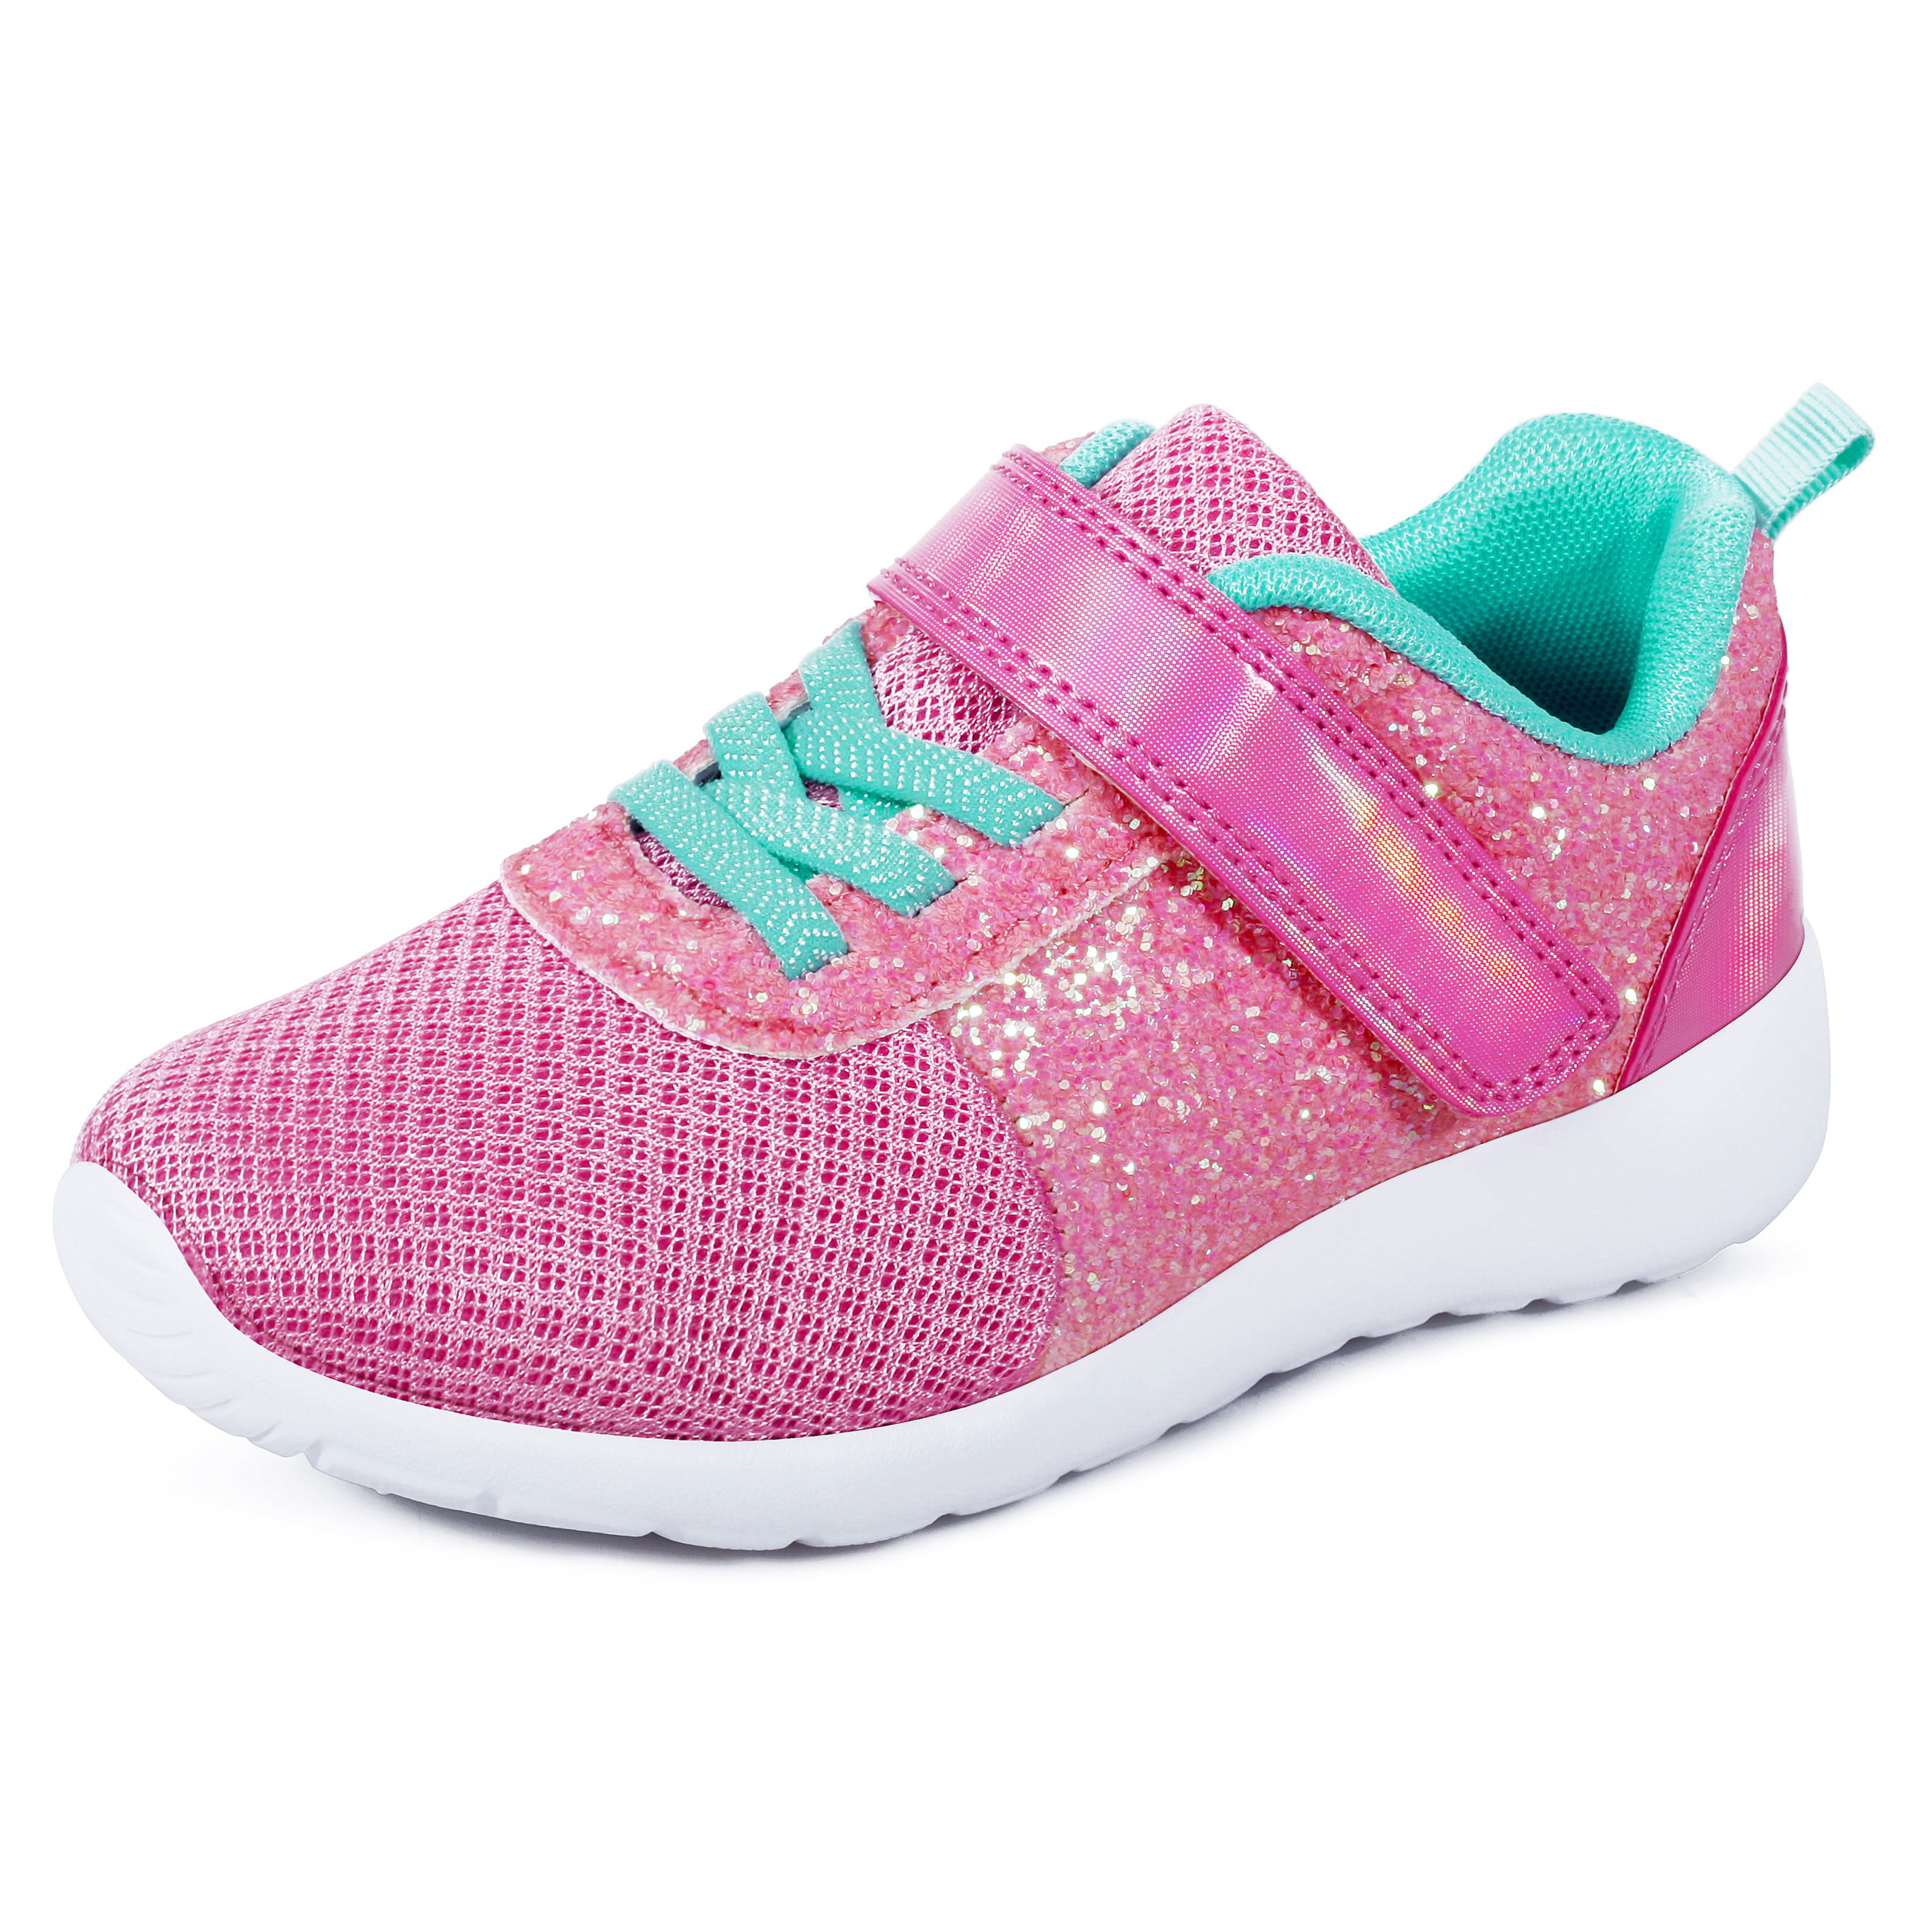 Kids Boys Girls Shoes Baby Children Casual Outdoor Athletic Sneakers Sport Shoes